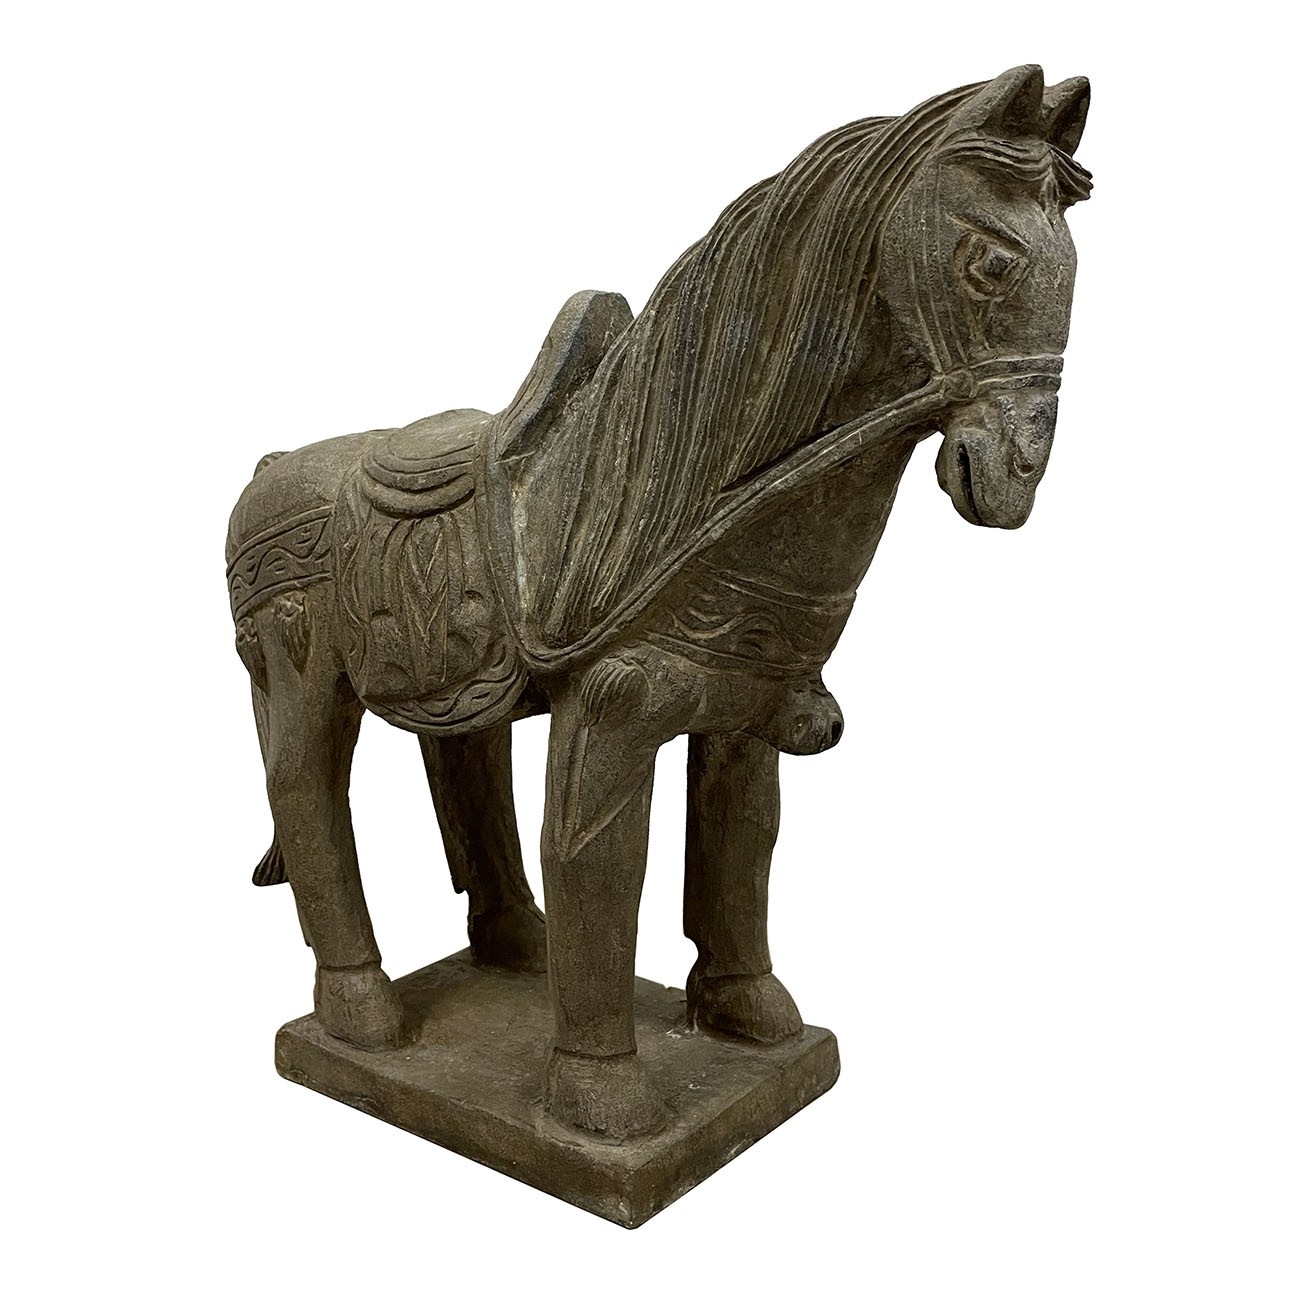 Early 20th Century Chinese Vintage Carved Stone Horse Statue/Sculpture